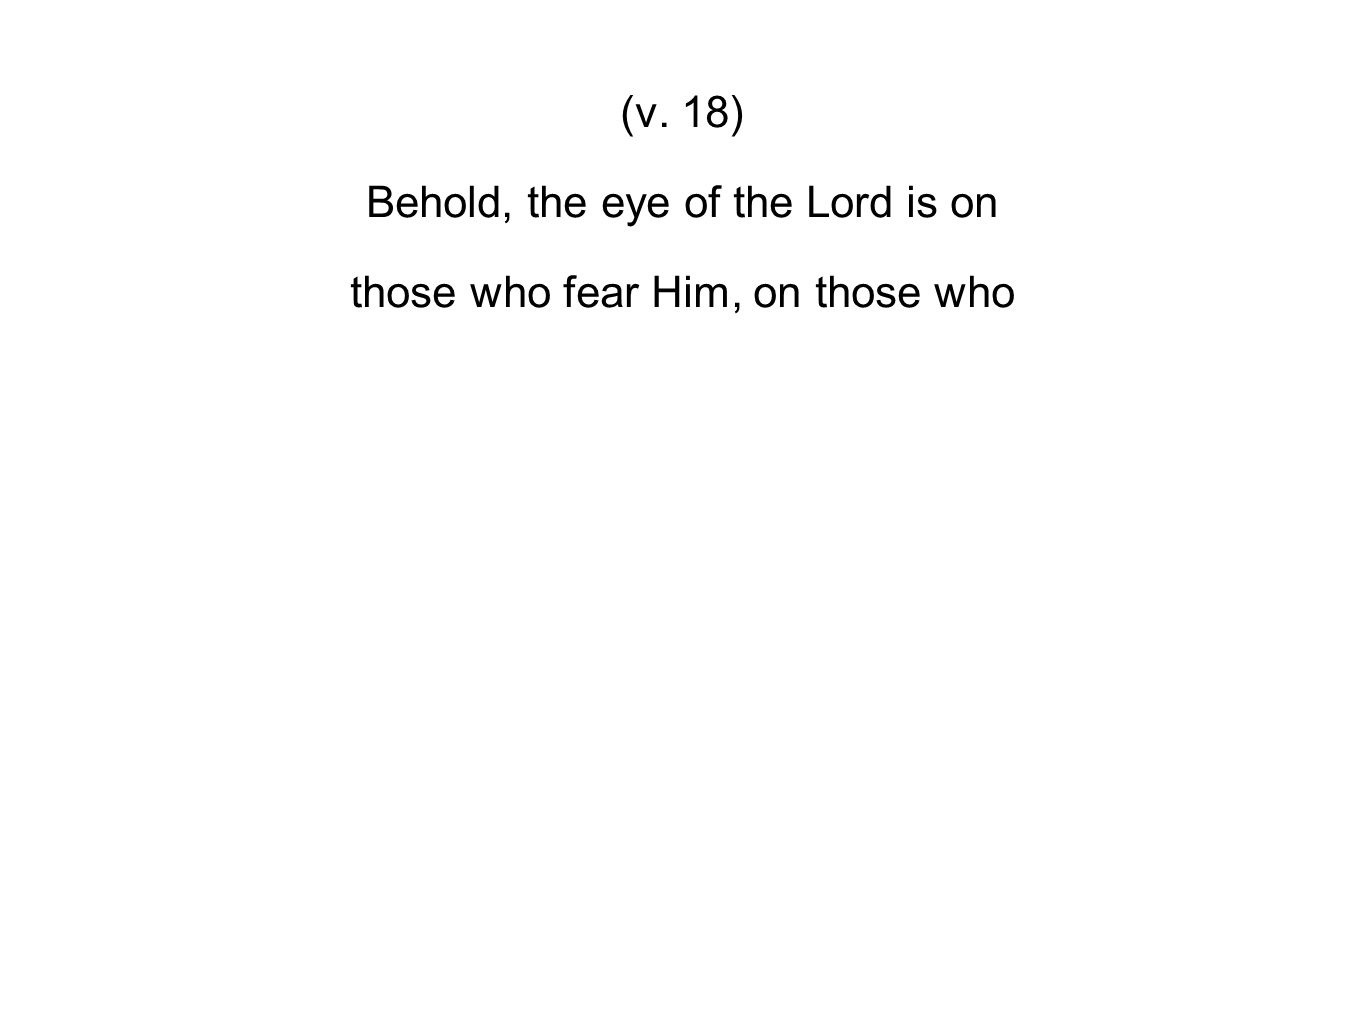 (v. 18) Behold, the eye of the Lord is on those who fear Him, on those who